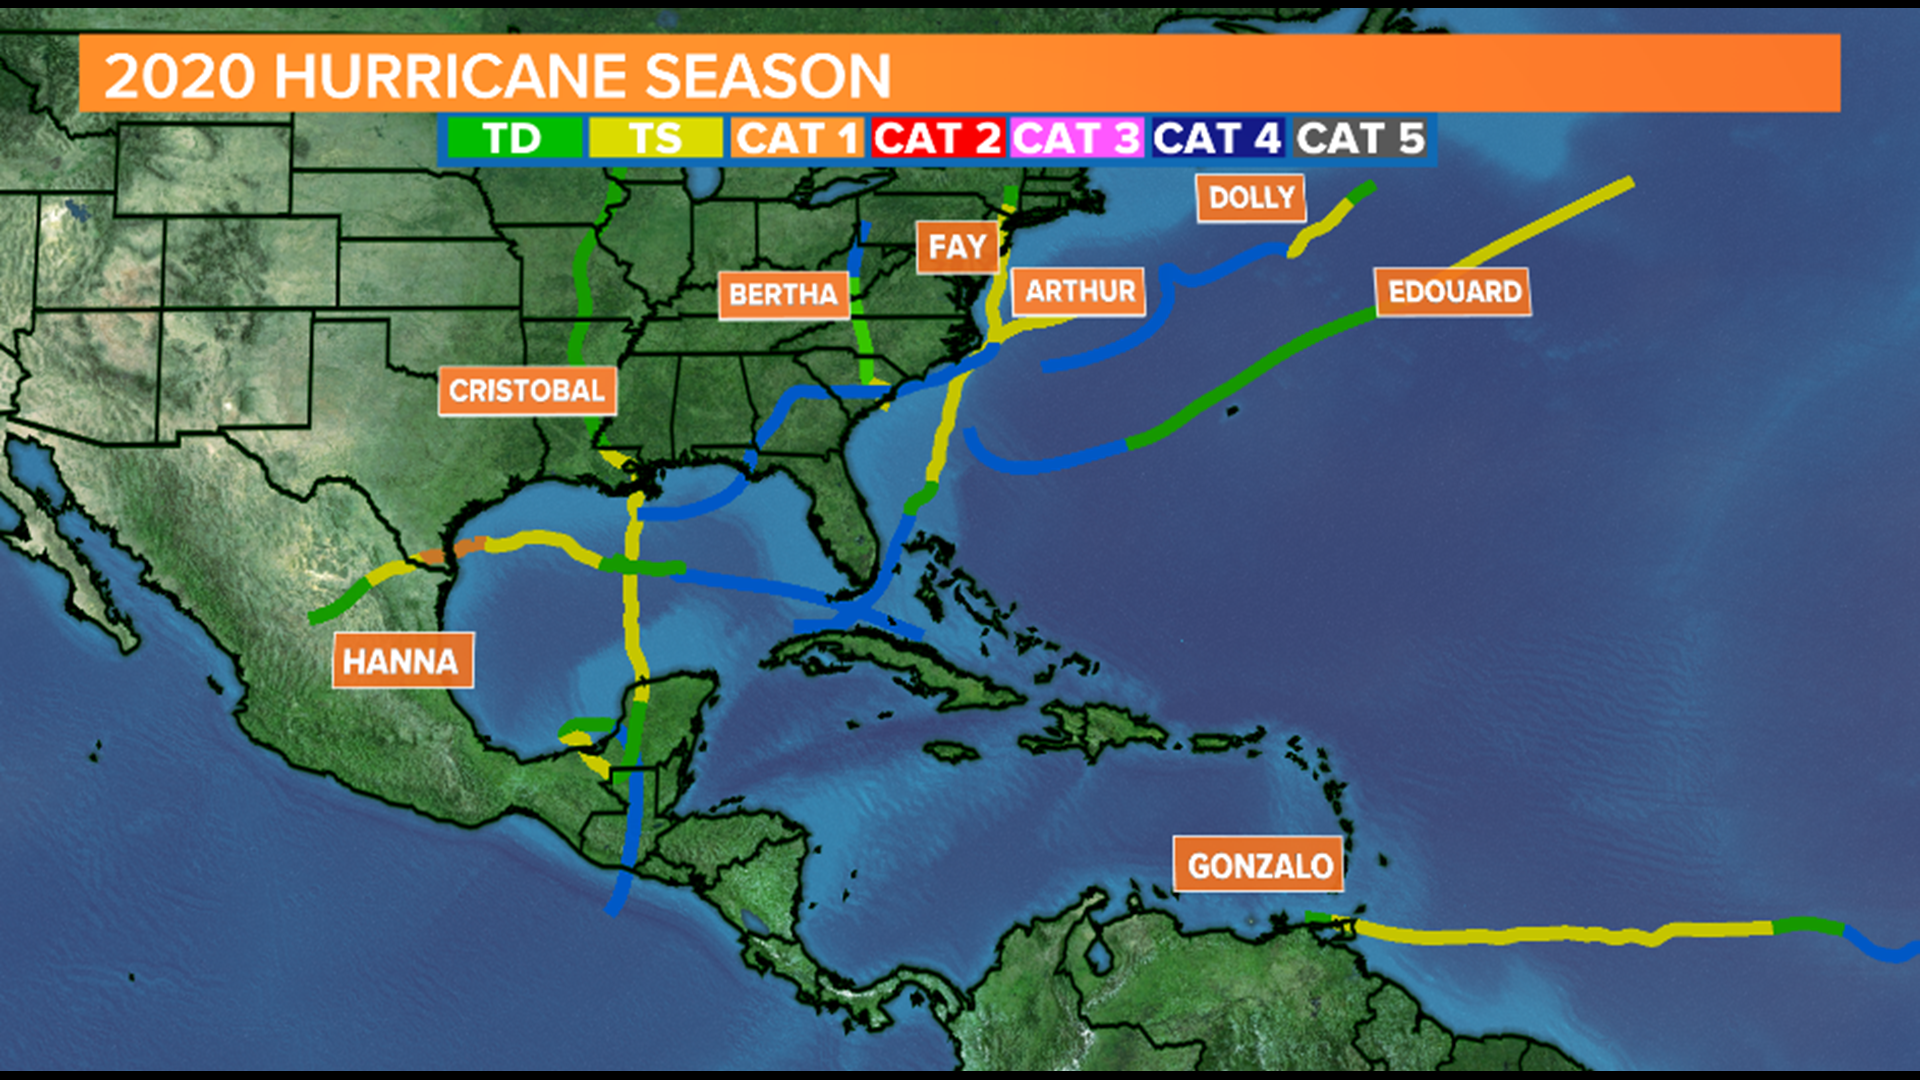 It's late July and there is a lot of time left in the 2020 Atlantic Hurricane Season. Are there similarities to 2005? Meteorologist Alex Calamia takes a look.